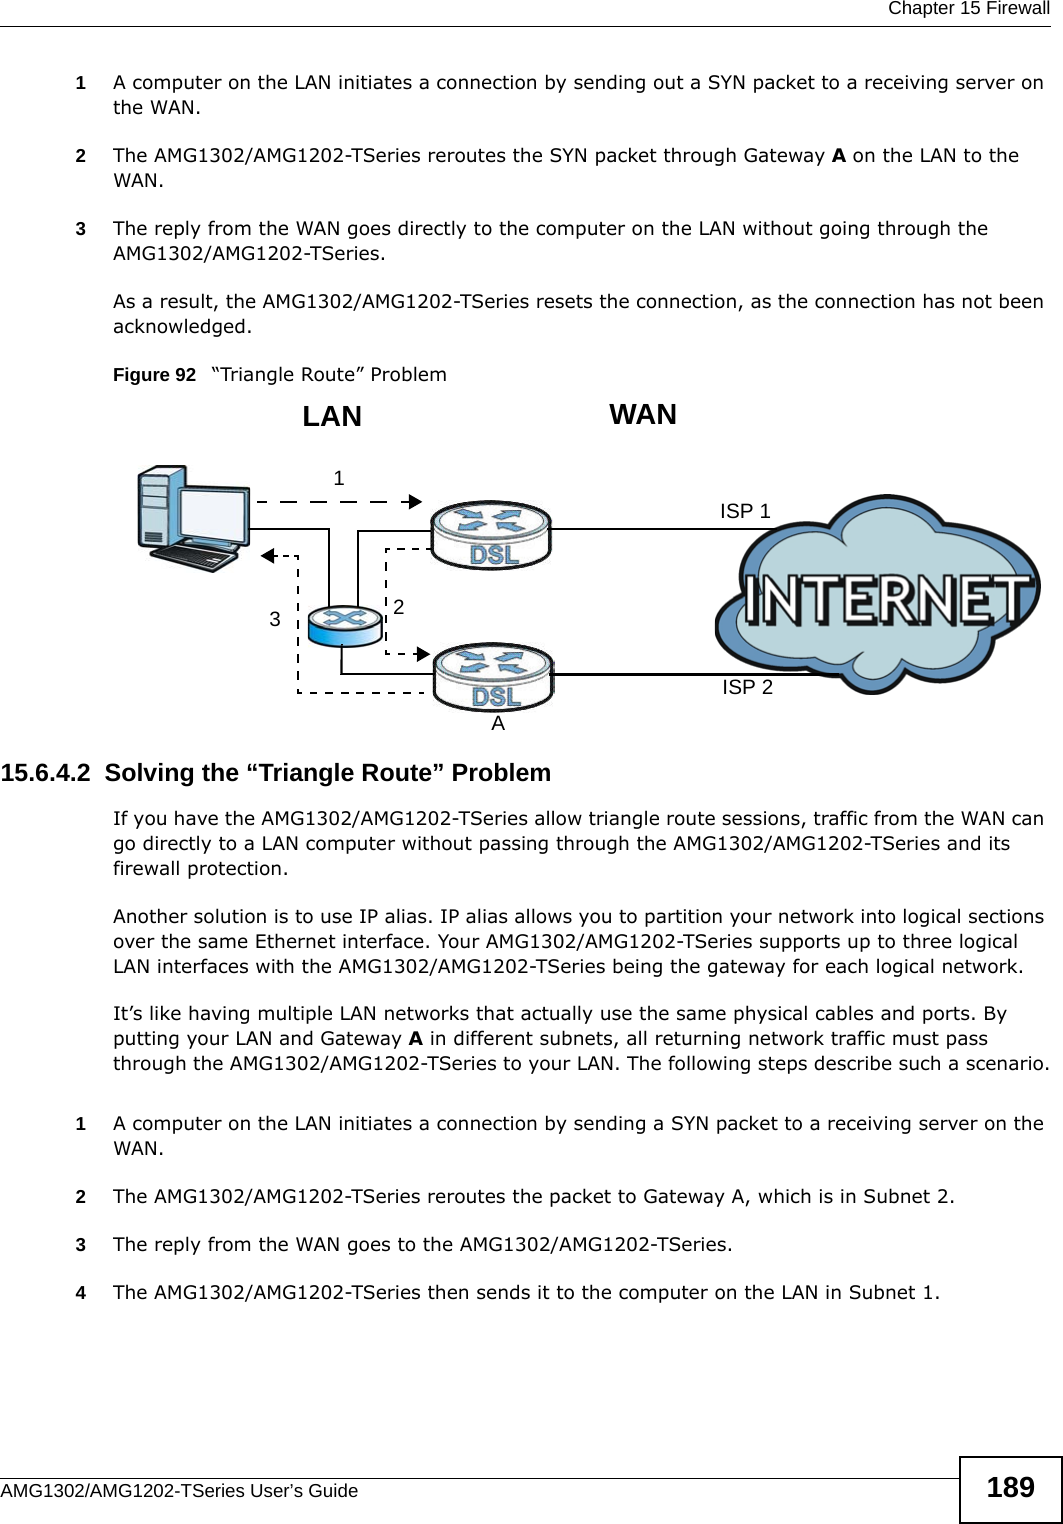  Chapter 15 FirewallAMG1302/AMG1202-TSeries User’s Guide 1891A computer on the LAN initiates a connection by sending out a SYN packet to a receiving server on the WAN.2The AMG1302/AMG1202-TSeries reroutes the SYN packet through Gateway A on the LAN to the WAN. 3The reply from the WAN goes directly to the computer on the LAN without going through the AMG1302/AMG1202-TSeries. As a result, the AMG1302/AMG1202-TSeries resets the connection, as the connection has not been acknowledged.Figure 92   “Triangle Route” Problem15.6.4.2  Solving the “Triangle Route” ProblemIf you have the AMG1302/AMG1202-TSeries allow triangle route sessions, traffic from the WAN can go directly to a LAN computer without passing through the AMG1302/AMG1202-TSeries and its firewall protection. Another solution is to use IP alias. IP alias allows you to partition your network into logical sections over the same Ethernet interface. Your AMG1302/AMG1202-TSeries supports up to three logical LAN interfaces with the AMG1302/AMG1202-TSeries being the gateway for each logical network. It’s like having multiple LAN networks that actually use the same physical cables and ports. By putting your LAN and Gateway A in different subnets, all returning network traffic must pass through the AMG1302/AMG1202-TSeries to your LAN. The following steps describe such a scenario.1A computer on the LAN initiates a connection by sending a SYN packet to a receiving server on the WAN. 2The AMG1302/AMG1202-TSeries reroutes the packet to Gateway A, which is in Subnet 2. 3The reply from the WAN goes to the AMG1302/AMG1202-TSeries. 4The AMG1302/AMG1202-TSeries then sends it to the computer on the LAN in Subnet 1.123WANLANAISP 1ISP 2